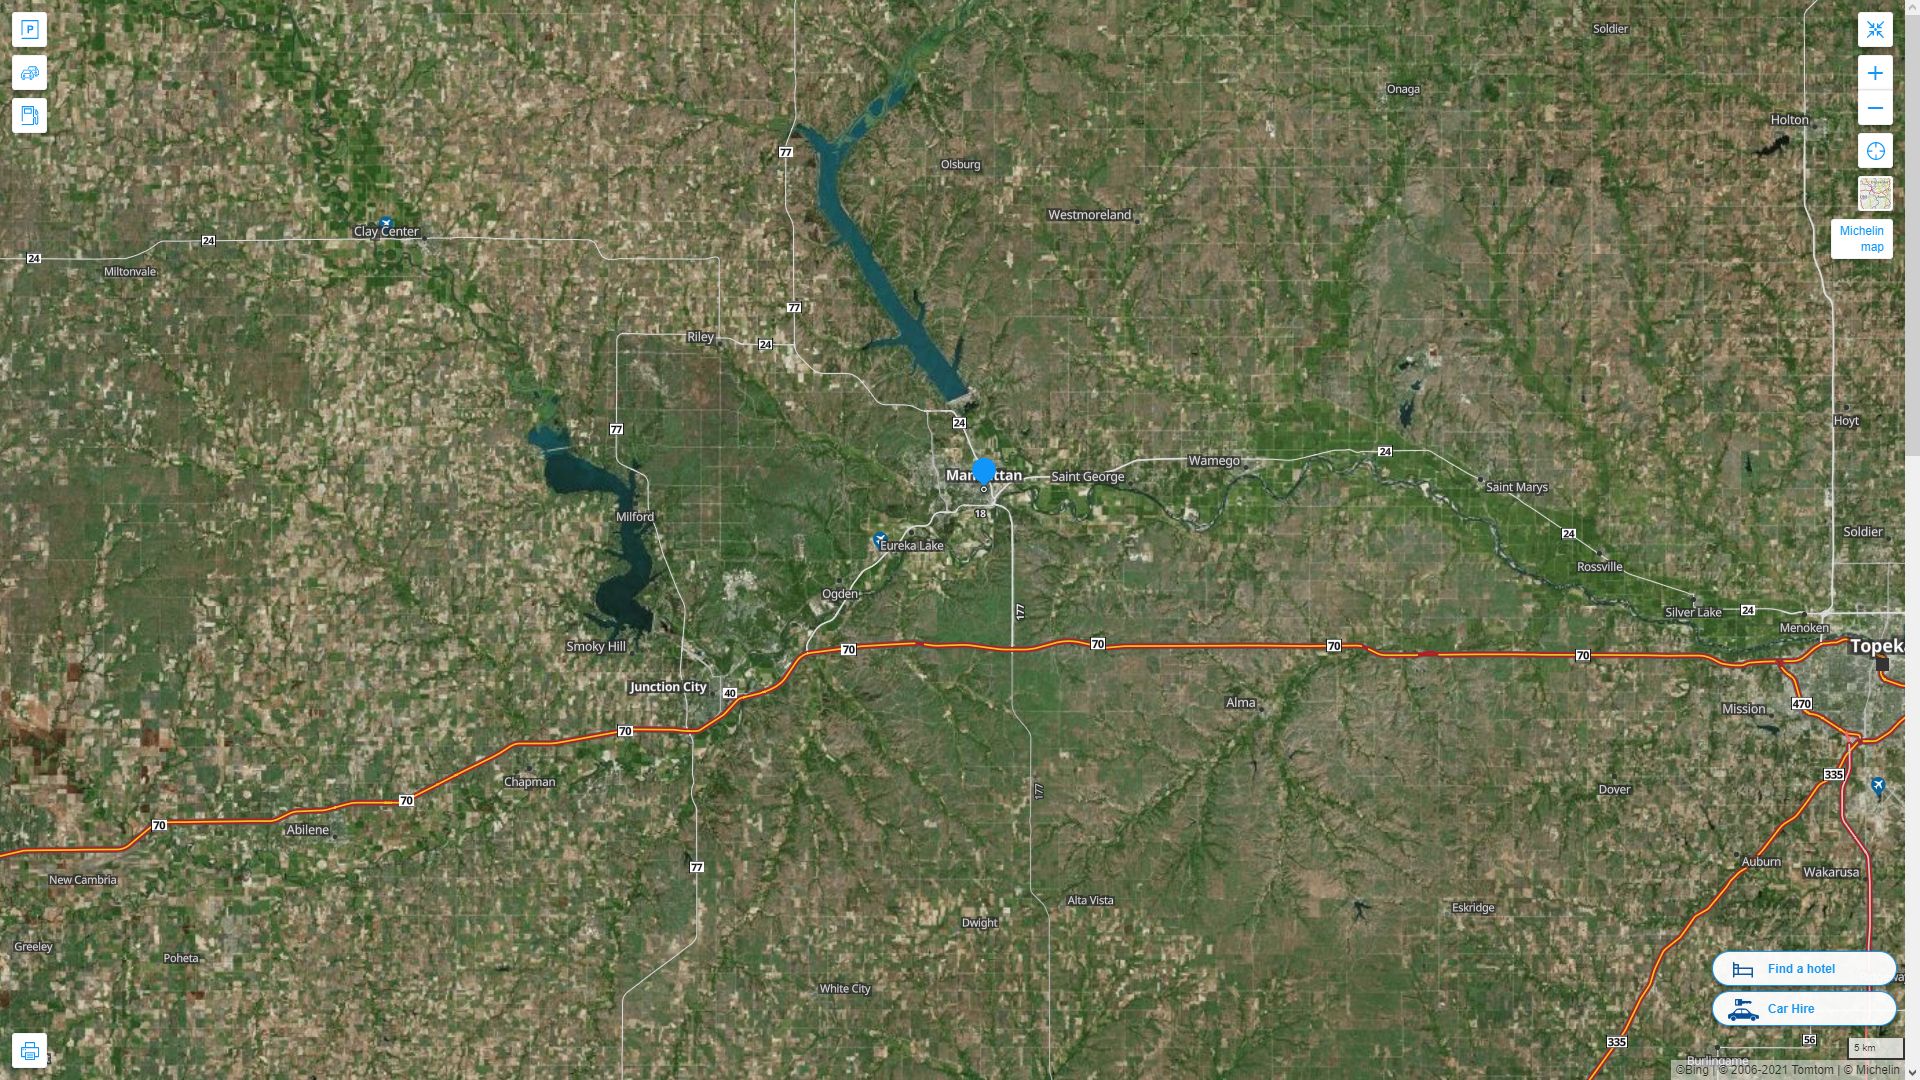 Manhattan Kansas Highway and Road Map with Satellite View